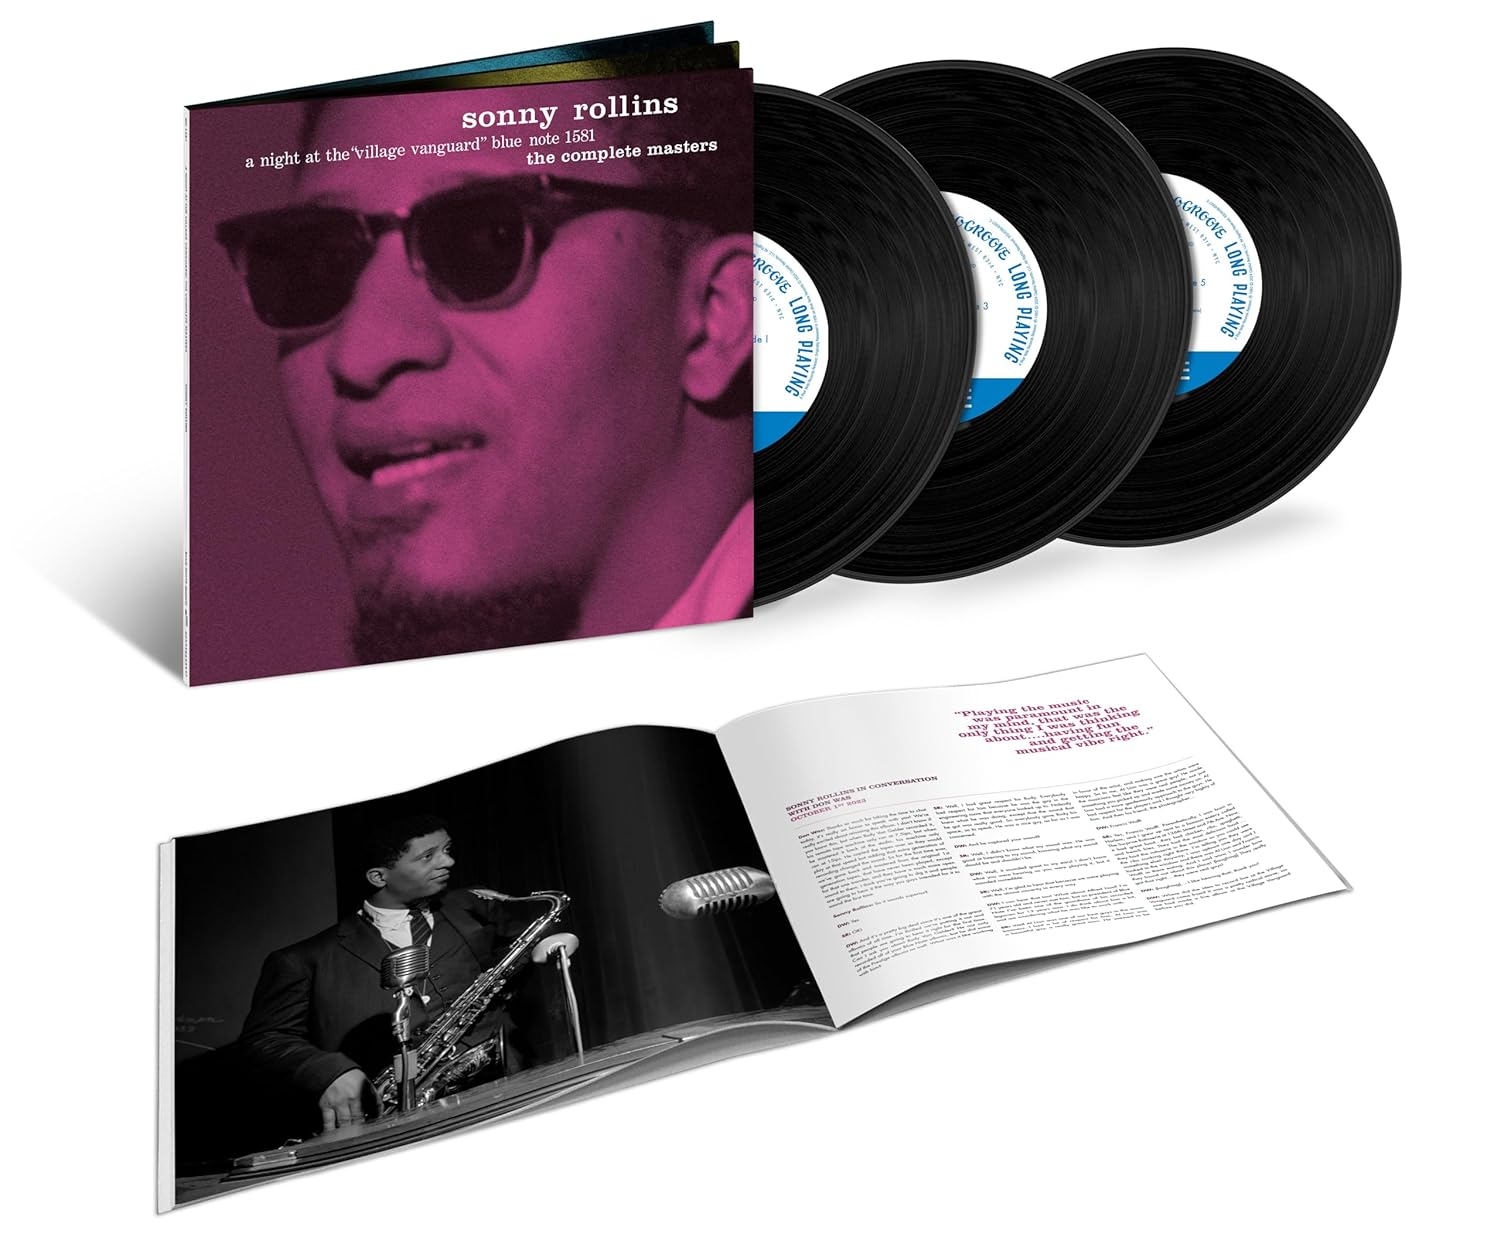 Sonny Rollins - Night at the Village Vanguard: The Complete Masters